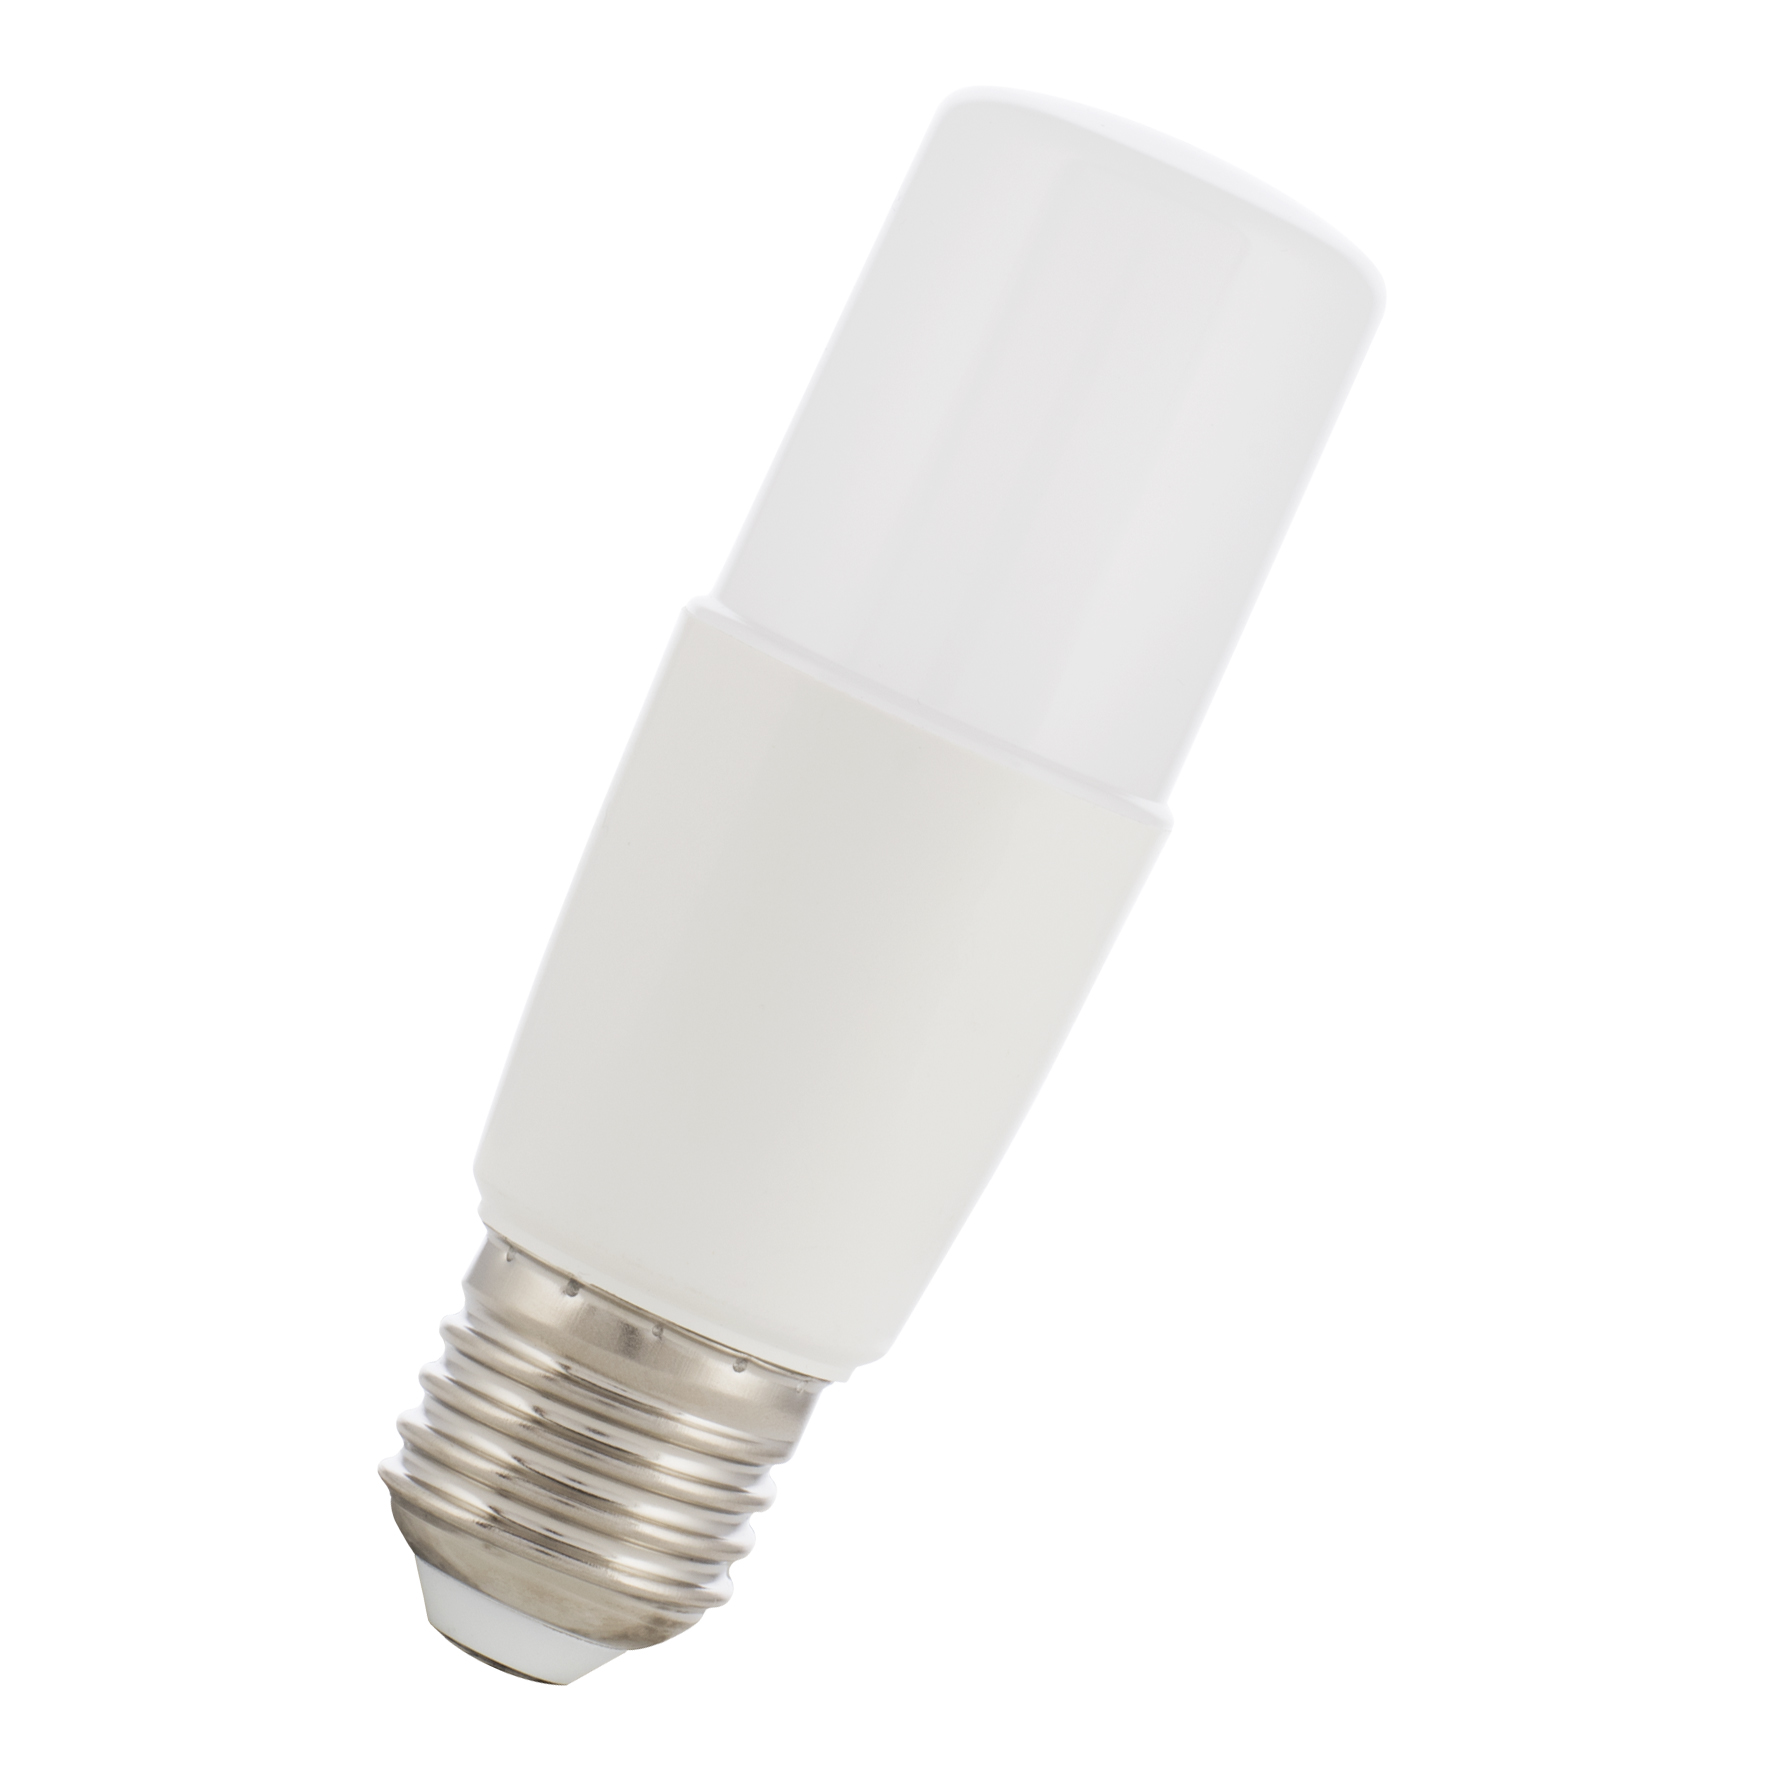 LED Ecobasic Compact T37 E27 5W (39W) 450lm 840